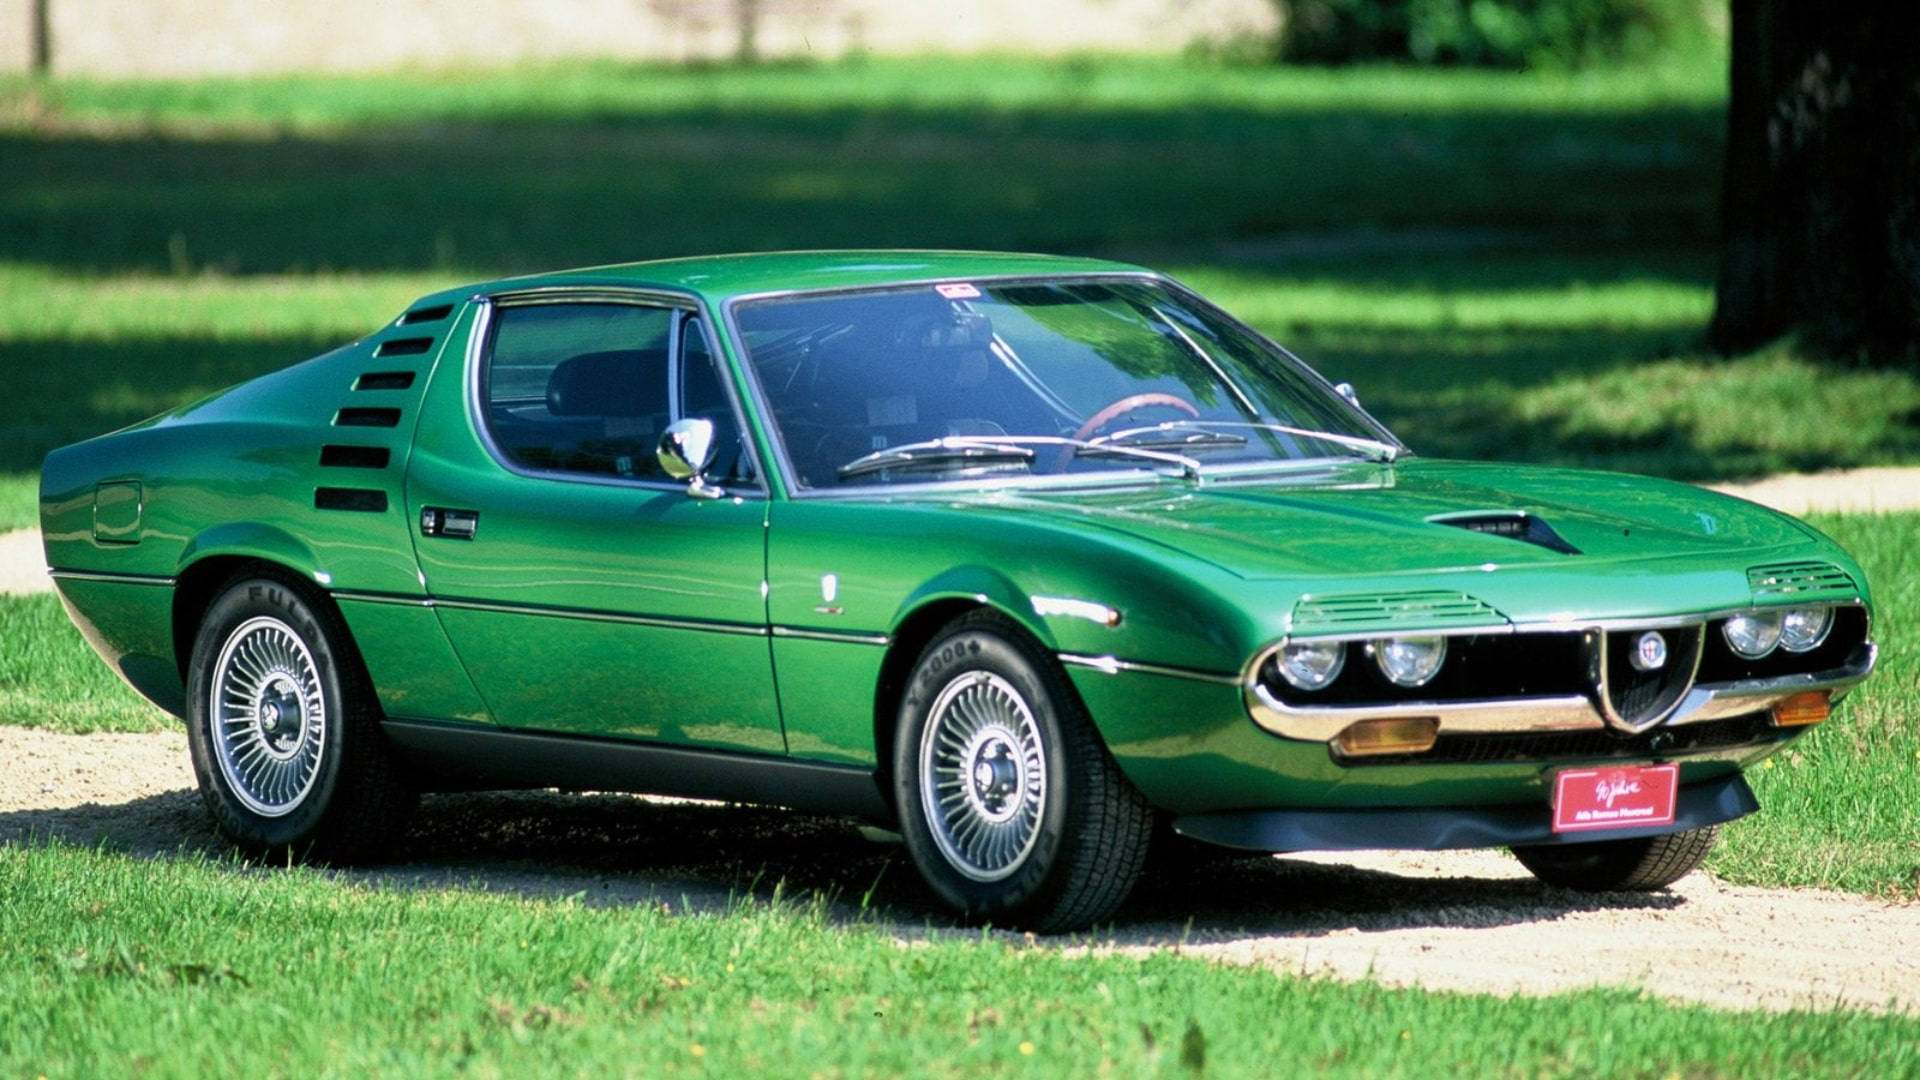 Enjoy the fresh air and high speed in the Green Alfa Romeo Montreal Wallpaper